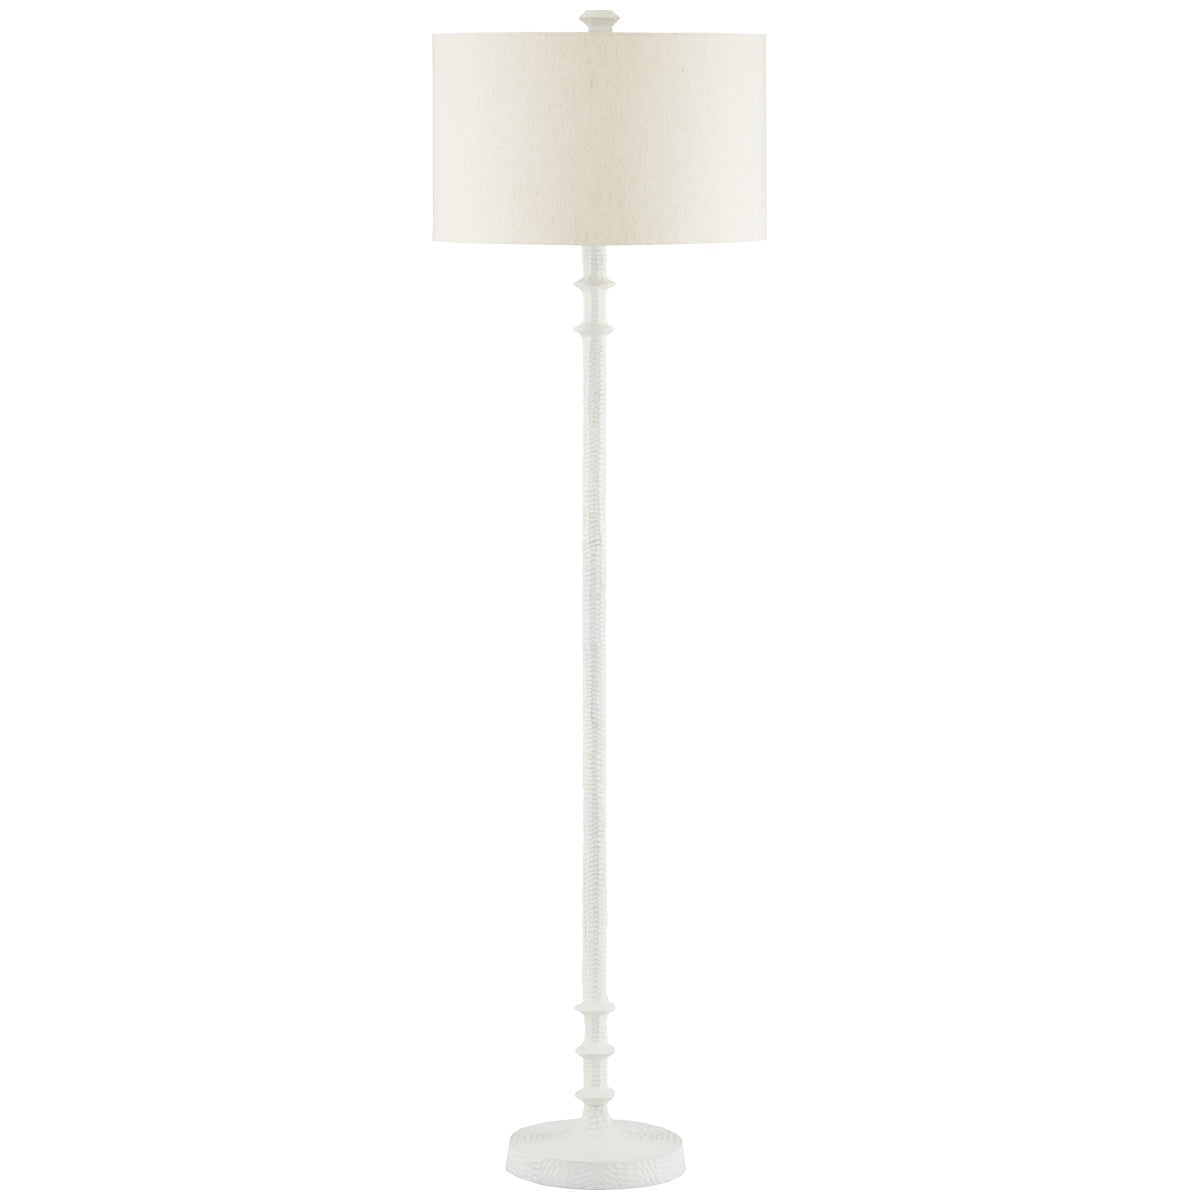 Currey and Company Gallo White Floor Lamp